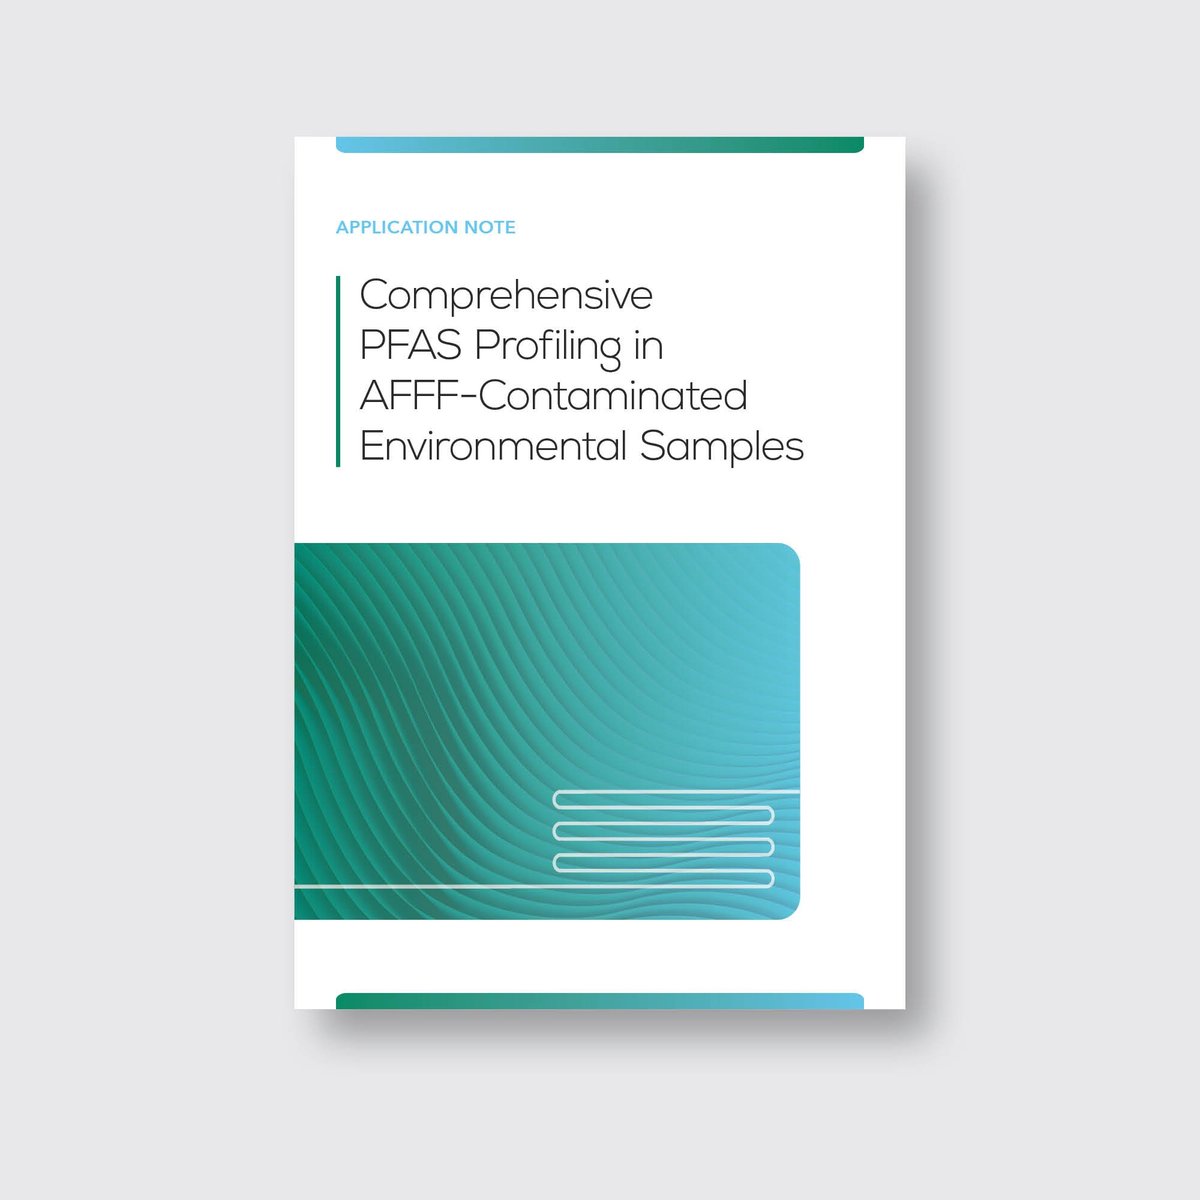 Comprehensive PFAS Profiling in AFFF-Contaminated Environmental Samples_New_Swirls_Thumbnails_Application Note-1